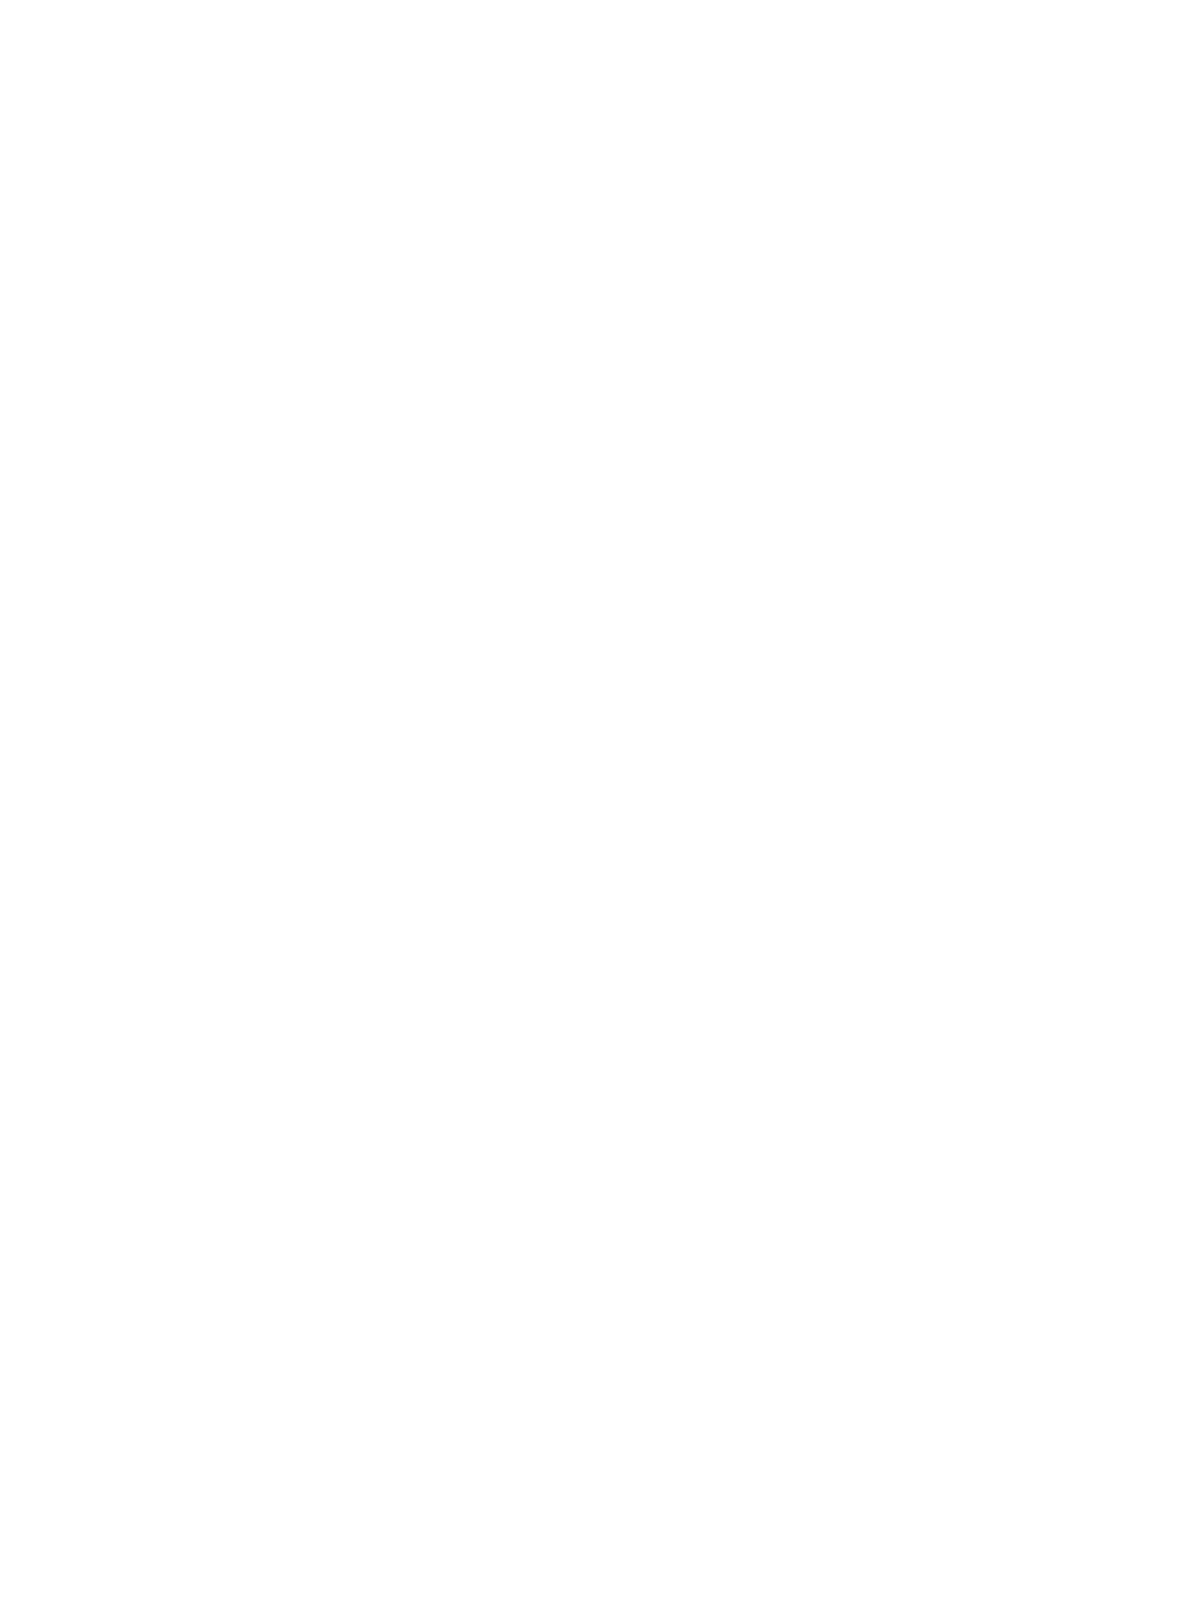 Bakers row hover